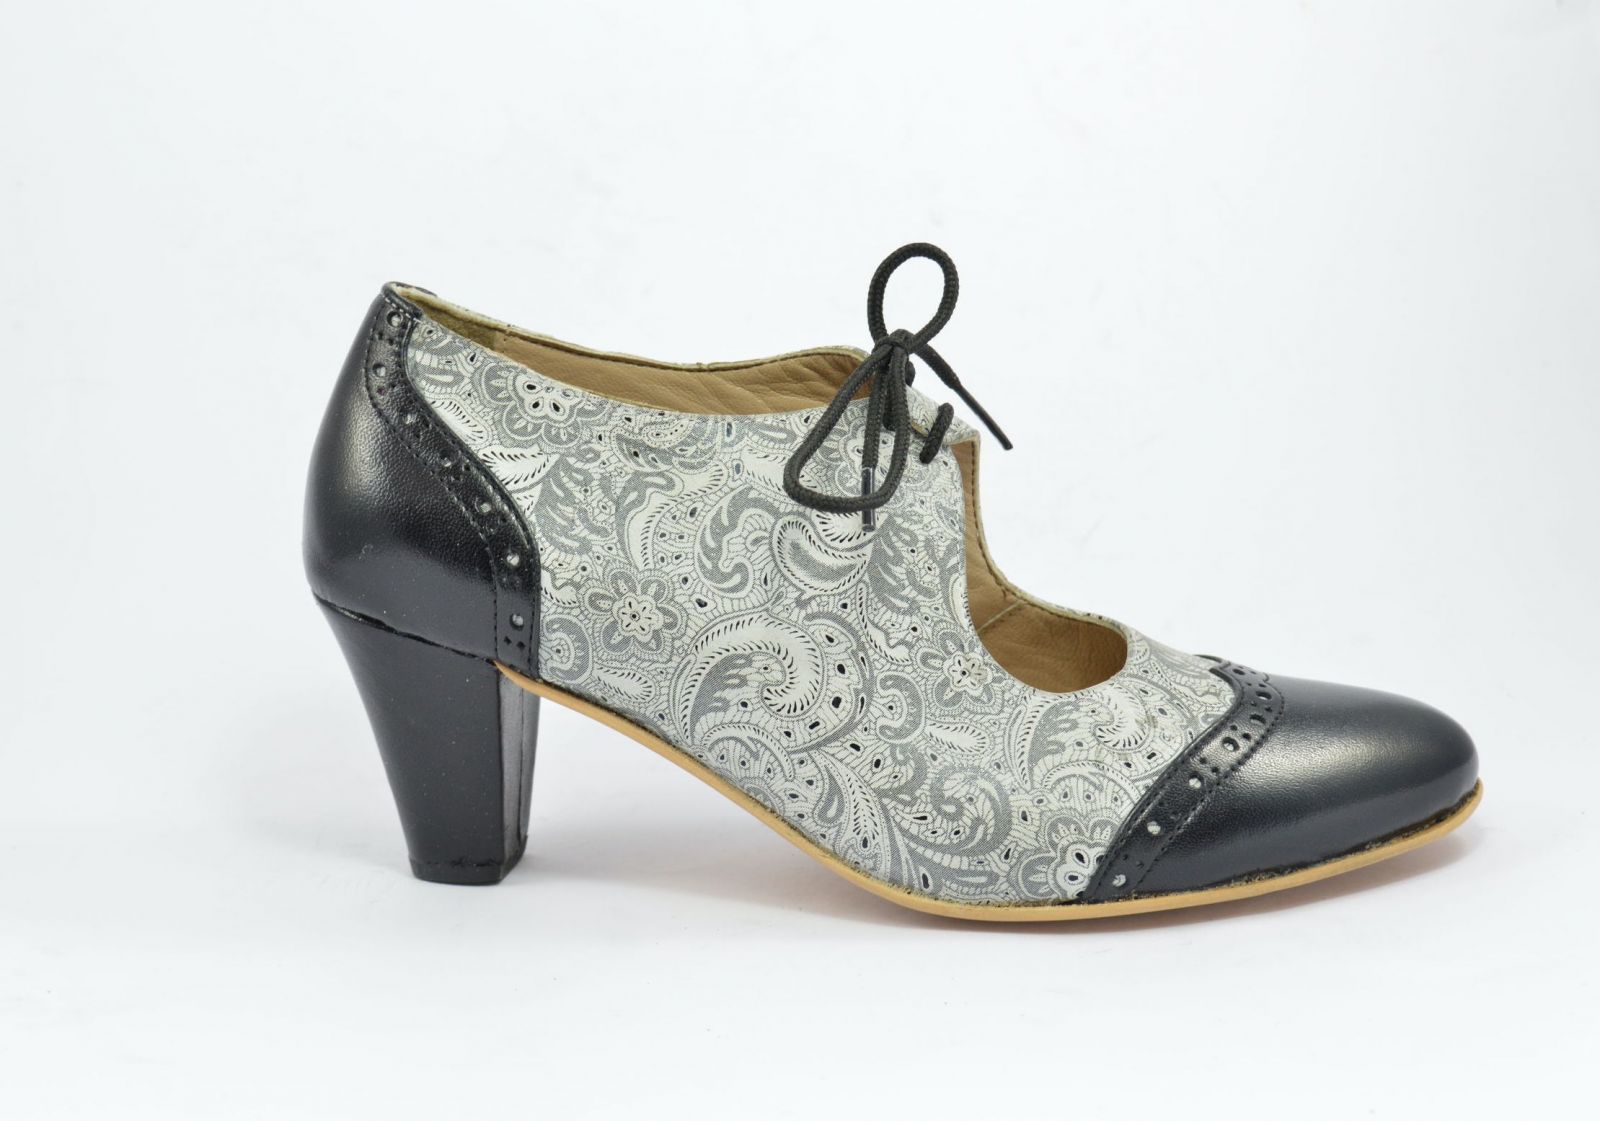 Women's Argentine Tango Shoe, closed style, by soft black leather and grey paisley leather